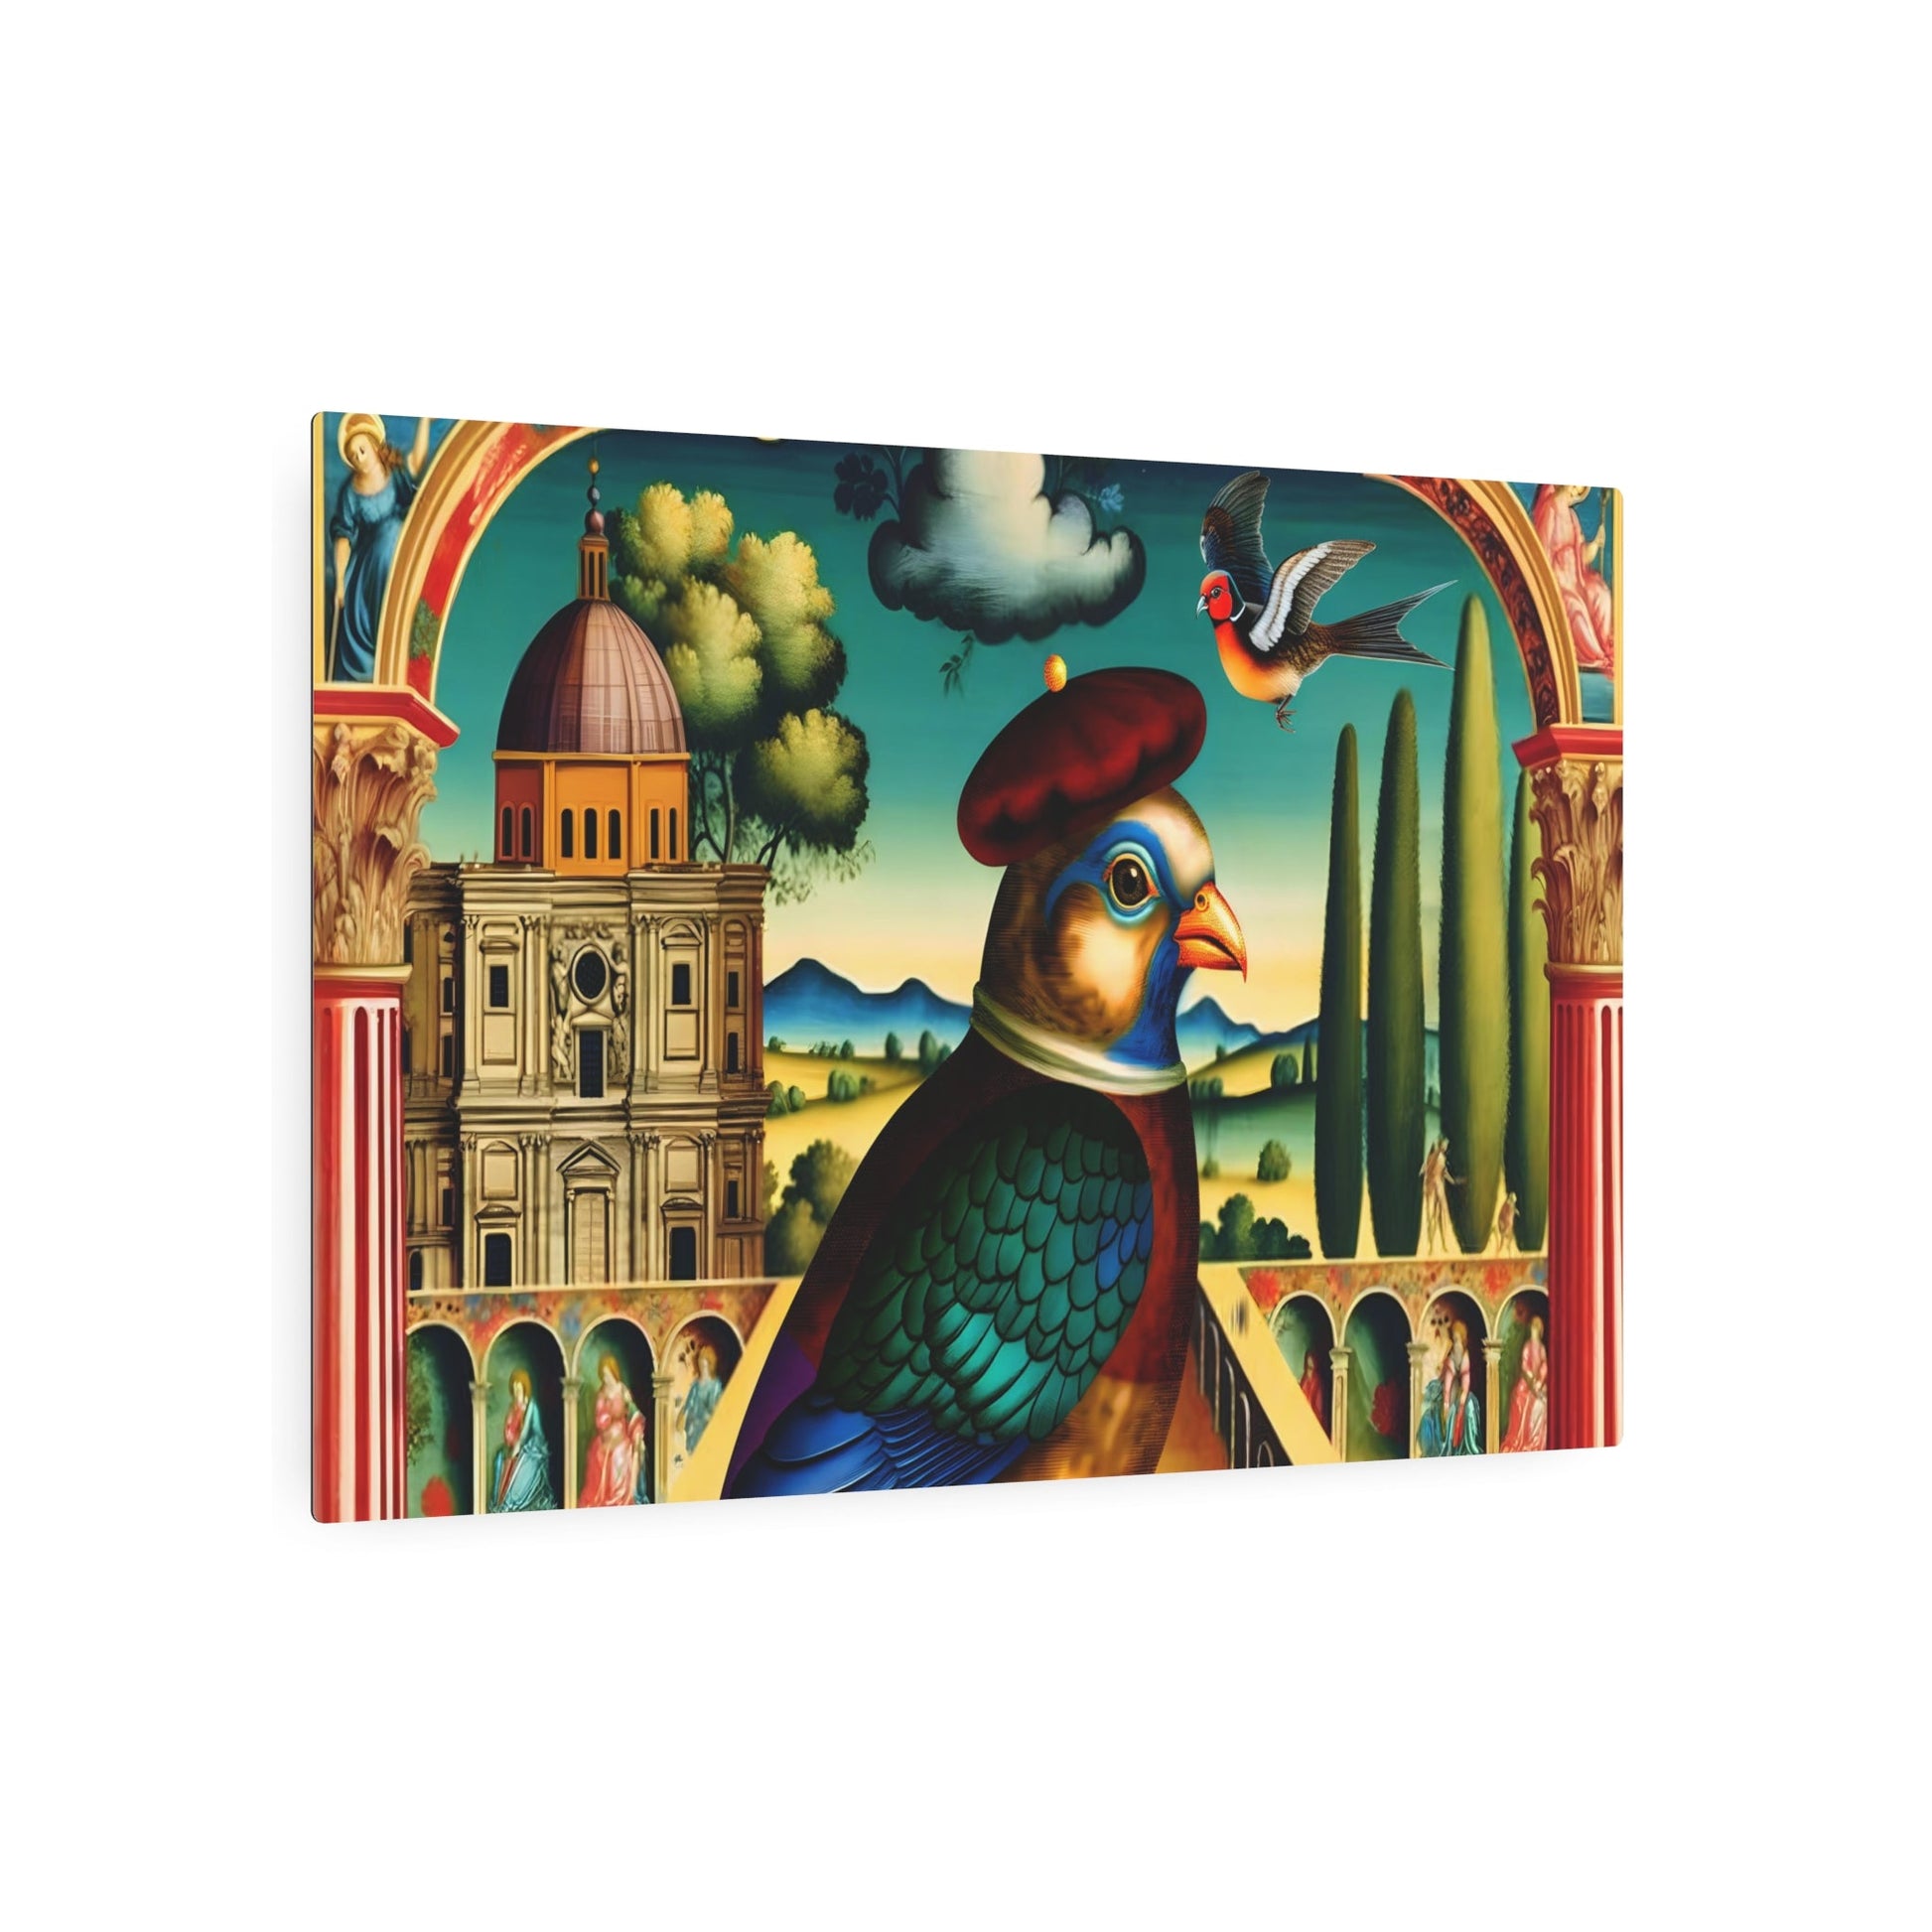 Metal Poster Art | "Renaissance Bird Artwork: Intricately Detailed & Colorful Painting with Rich Clothing, Landscapes, Luminous Skies & - Metal Poster Art 36″ x 24″ (Horizontal) 0.12''